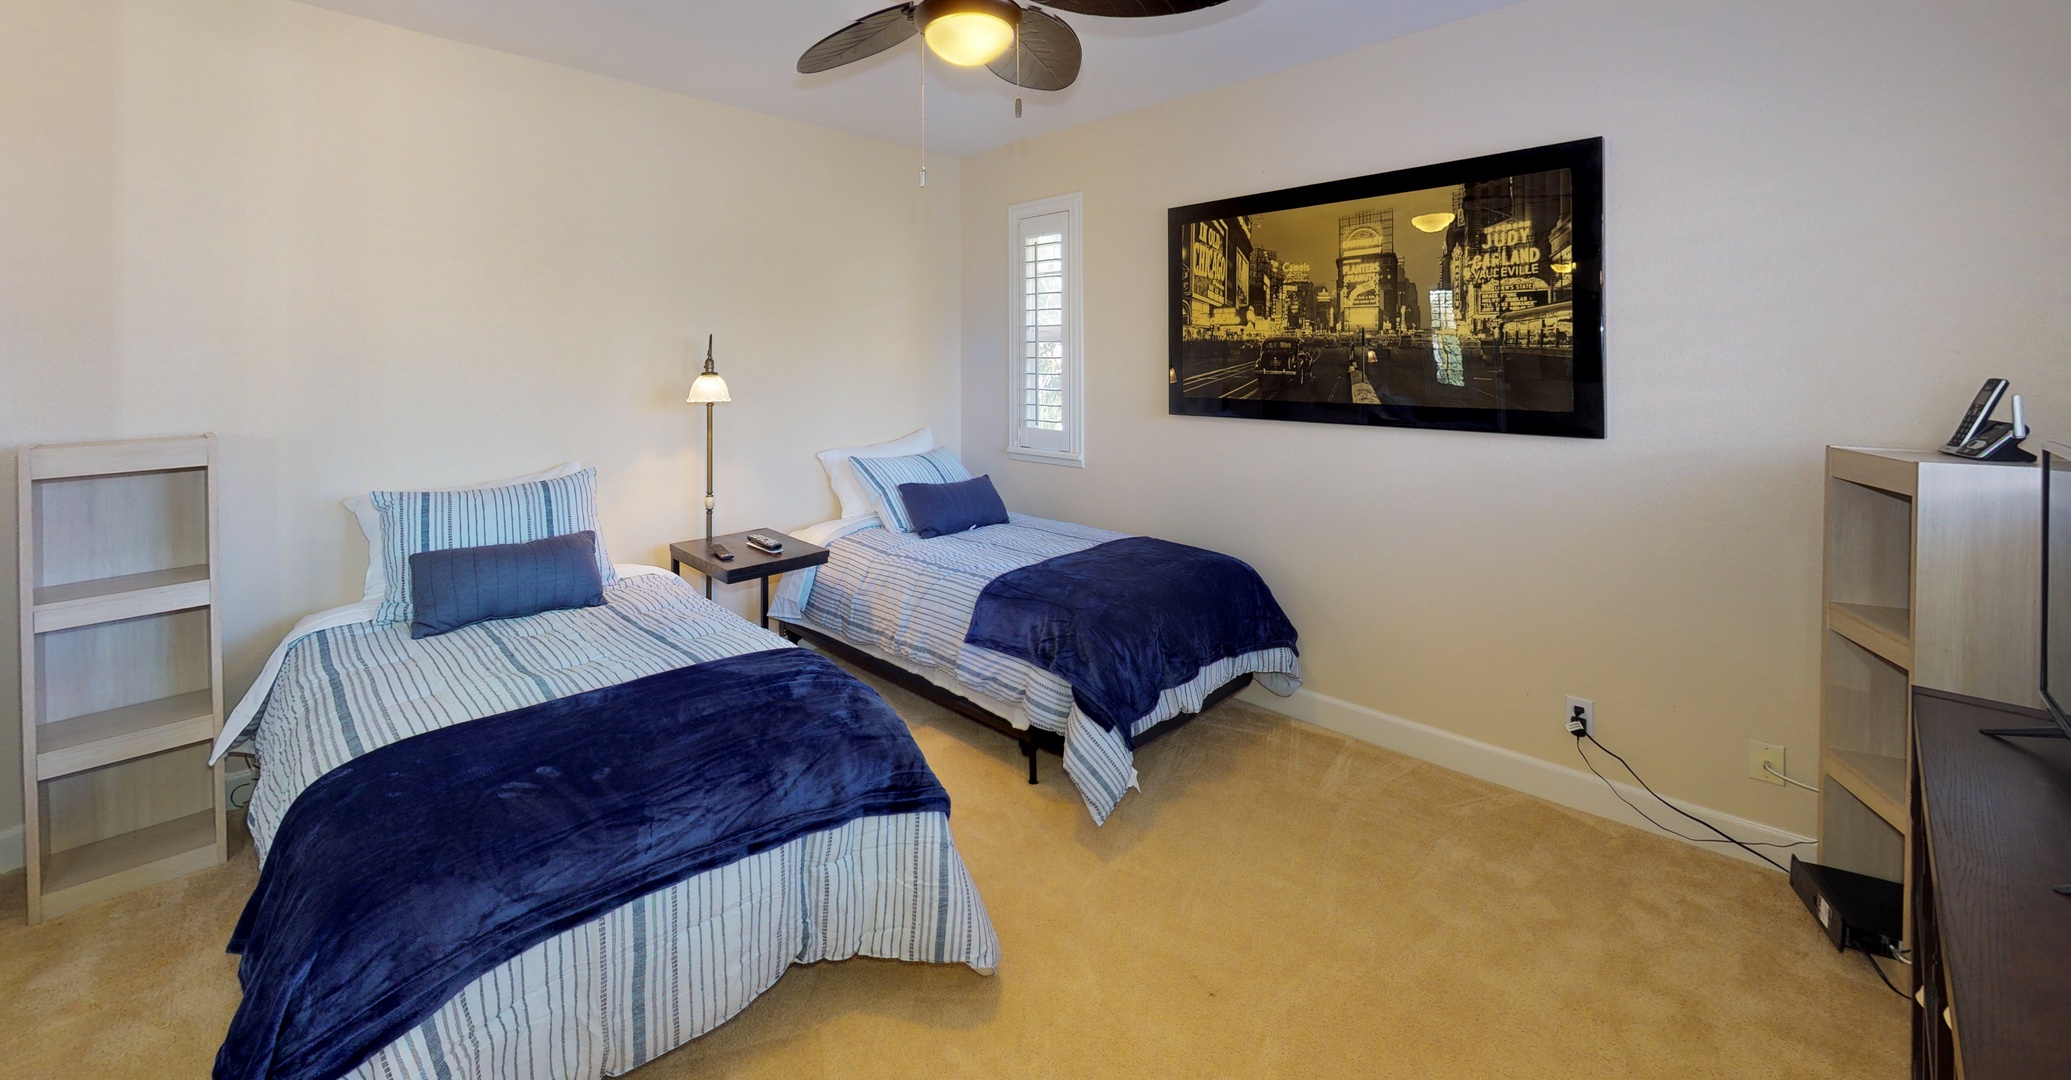 Kapolei Vacation Rentals, Ko Olina Kai 1065E - The third bedroom features twin beds and a TV.